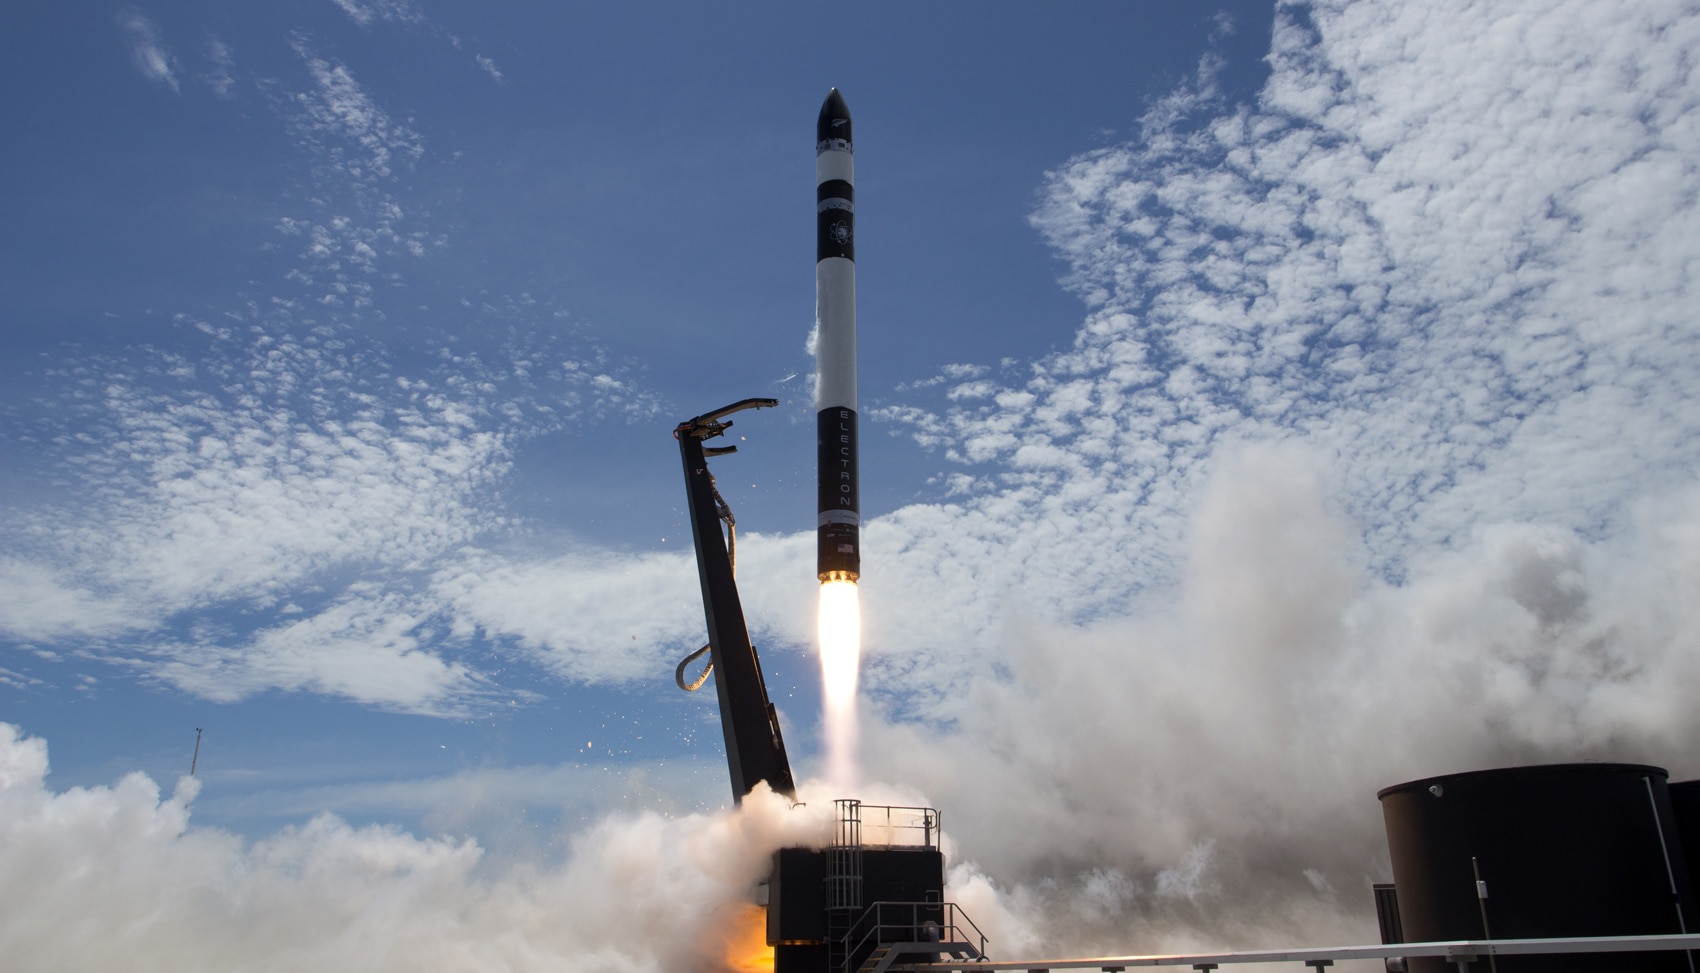 The first successful launch of the Rocket Lab Electron rocket on Jan 21, 2018. Credit: Rocket Lab